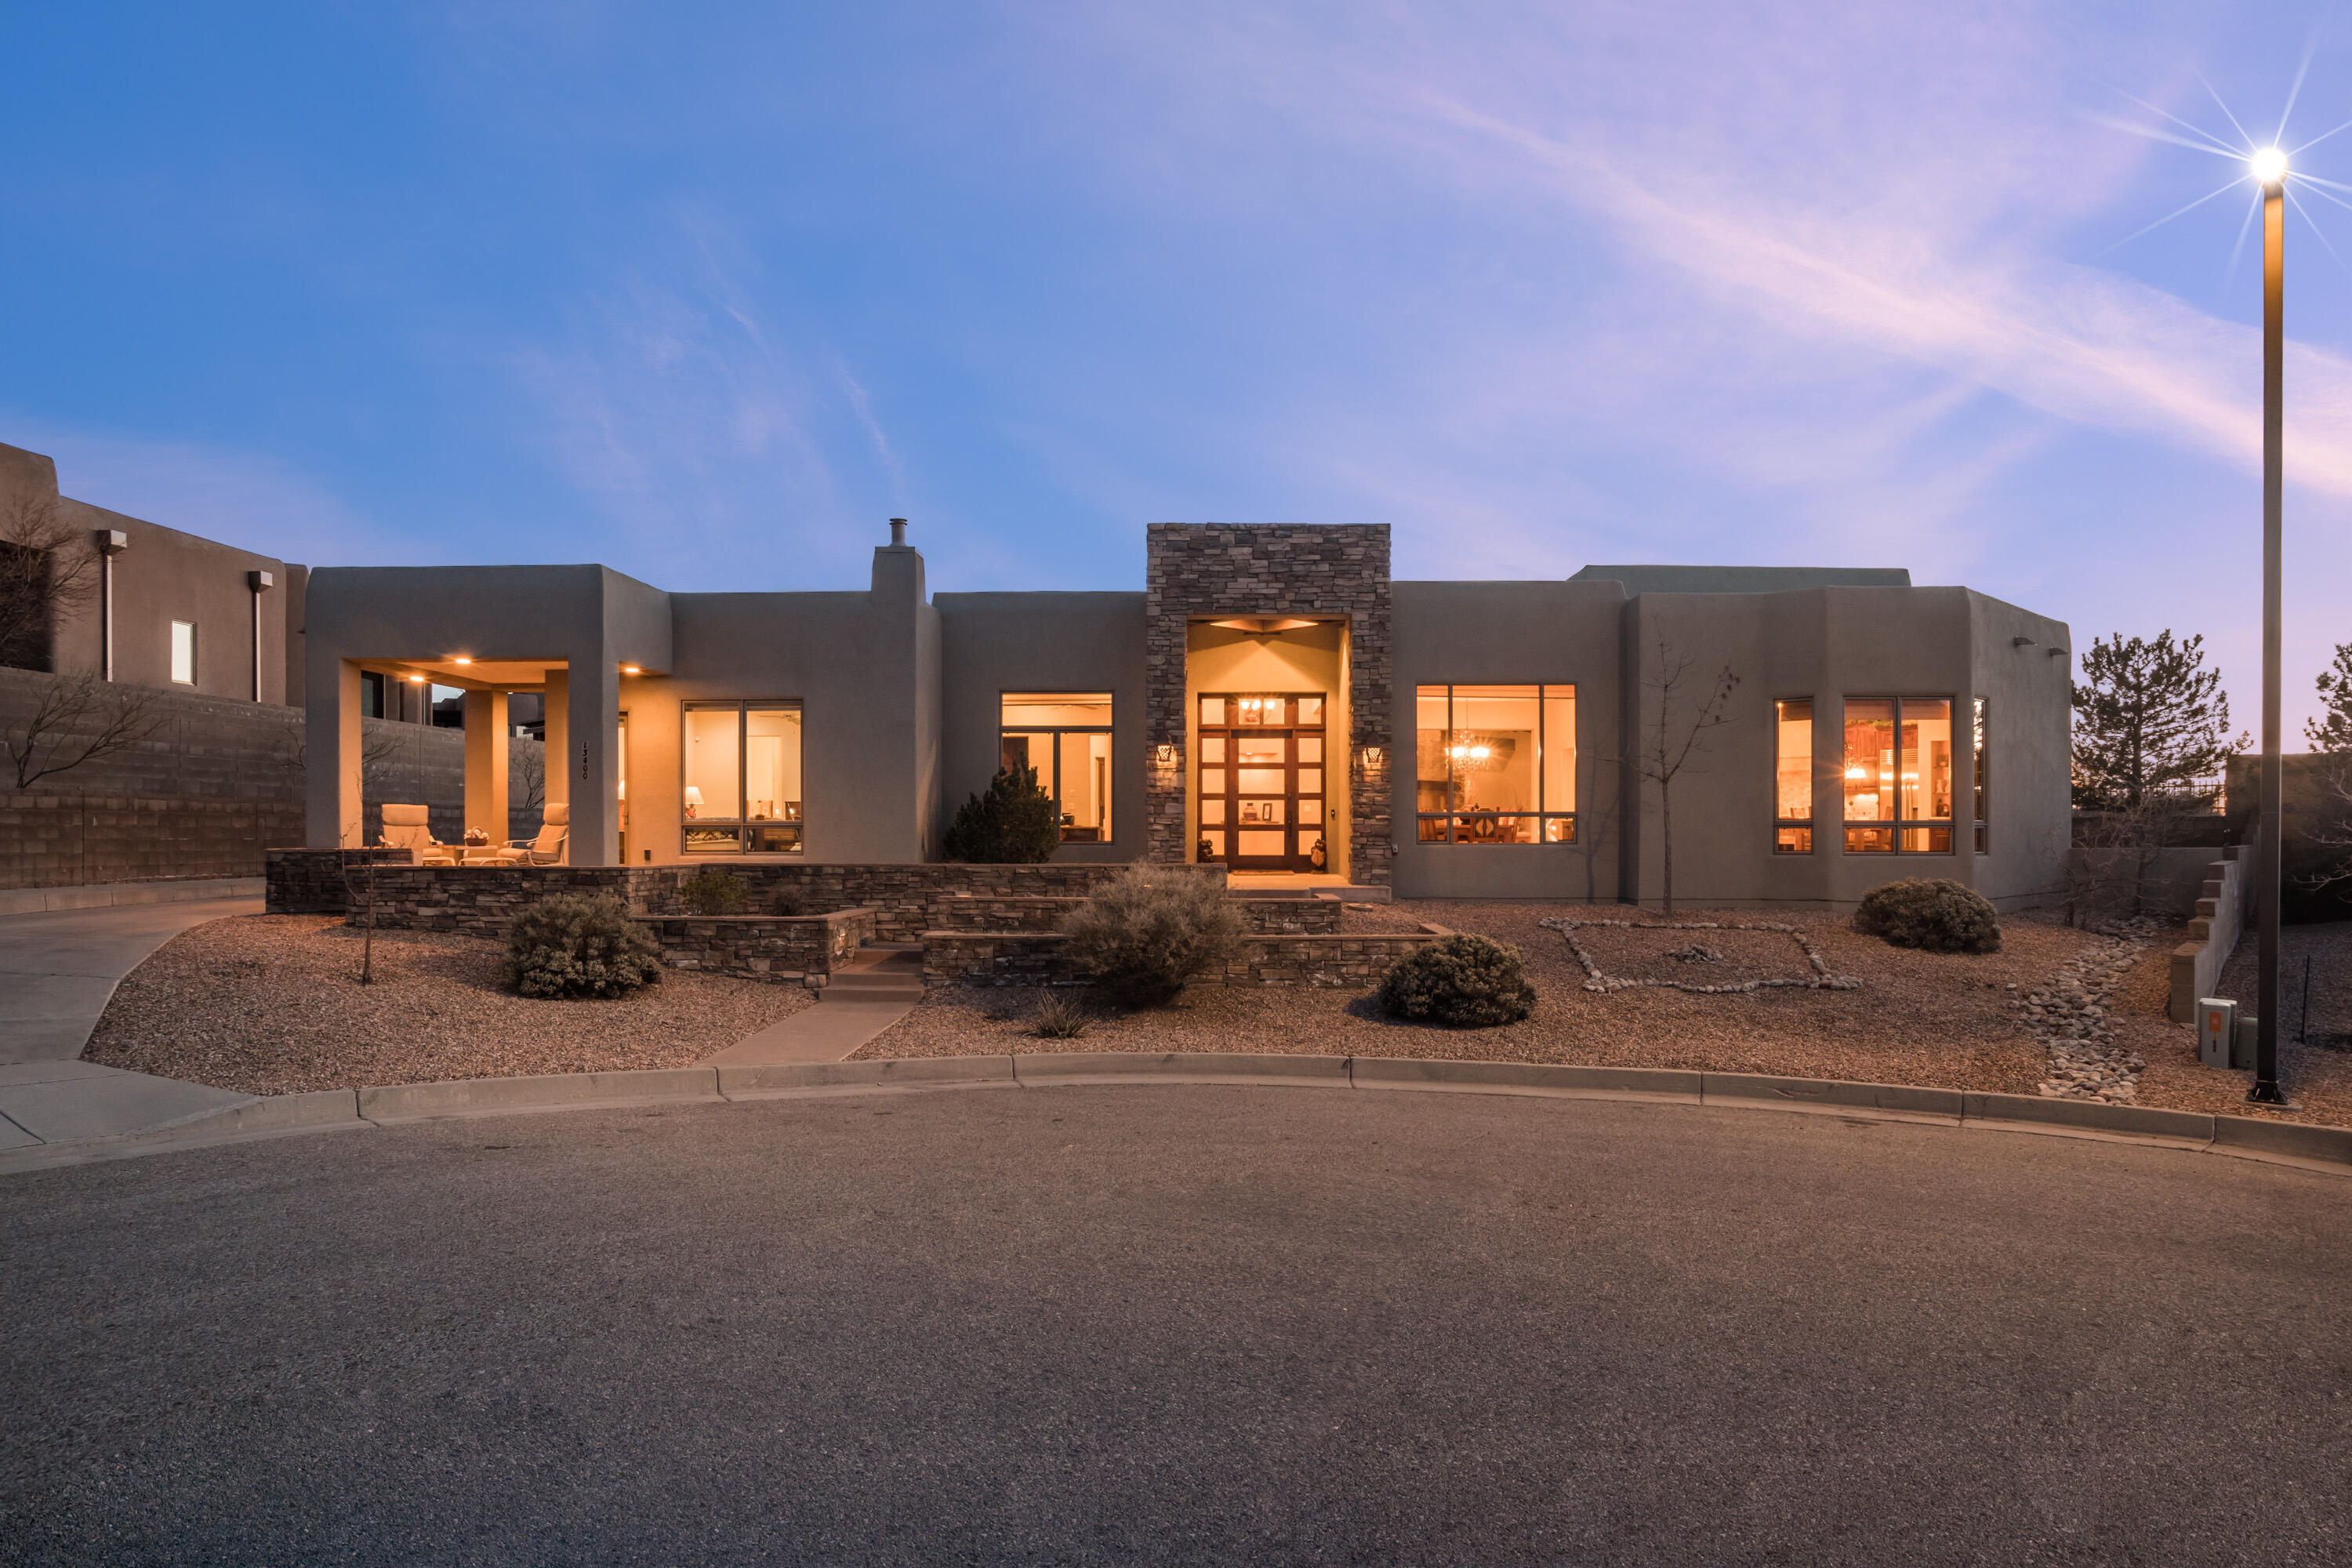 This incredible single story custom home is located at the end of a cut-de-sac backing up to open space within the masterplanned community of High Desert. The home was built to take advantage of the incredible views afforded from this unique homesite. Quality finishes such as slate and hardwood flooring, plaster accent walls, hand stacked stone accents, beautiful beamed ceilings, handcrafted furniture grade cabinetry, rich granite, and Wolf/ Subzero appliances. Dramatic views of the crest of the Sandia Mountains and dramatic sunsets & city lights can be found from this home. Built entirely on one level, there are no interior steps in this home offering universal accessibility. The oversized 3 car garage offers tons of storage. Enjoy hiking, biking & walking trails right outside your door.